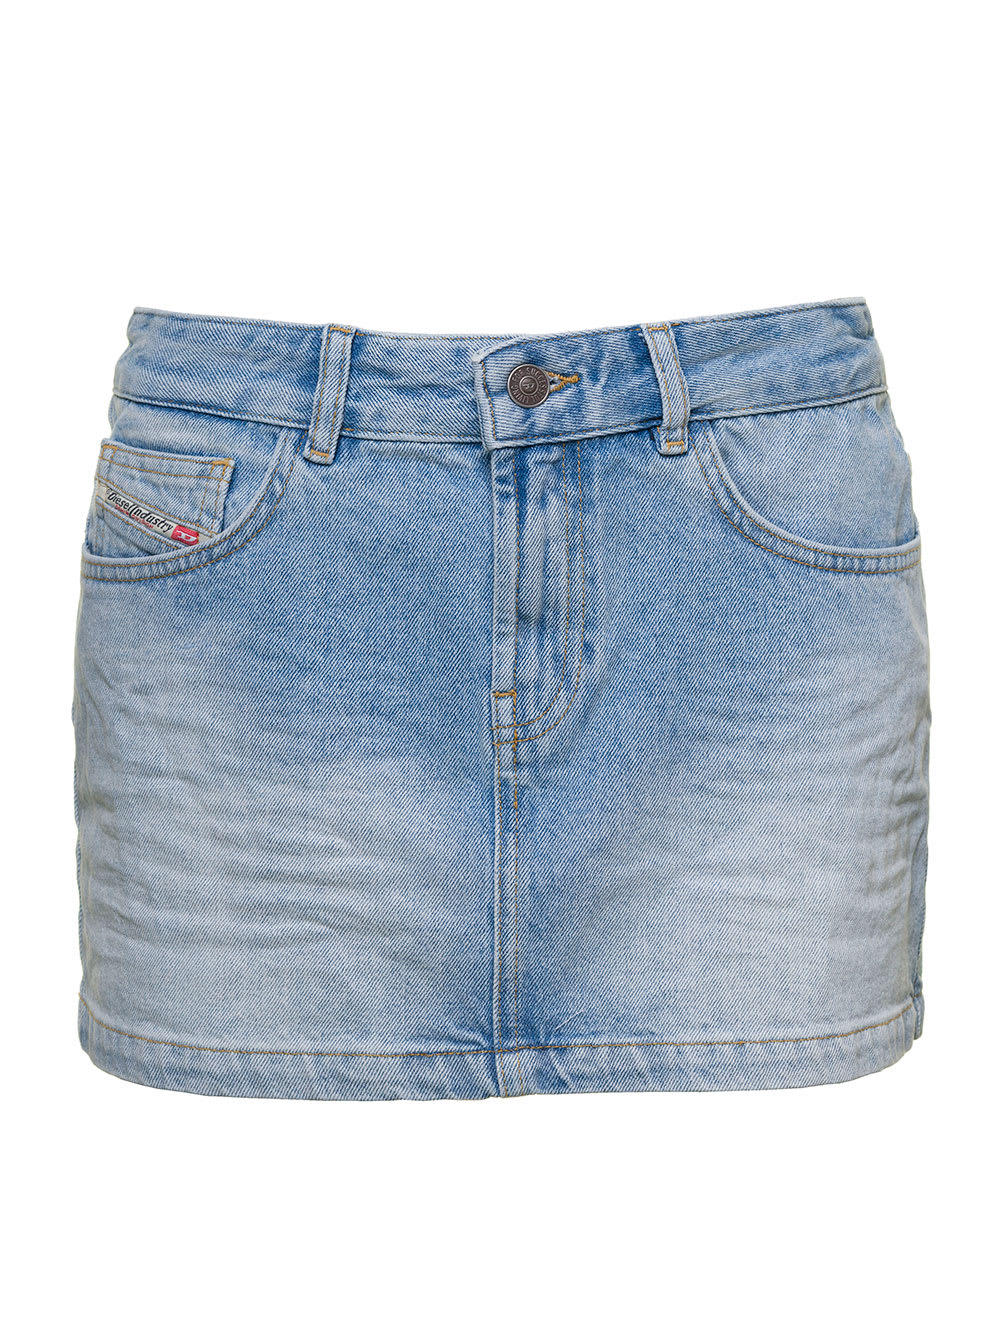 DIESEL DE-RON-S1 LIGHT BLUE MINI SKIRT WITH MAXI OVAL D LOGO PATCH IN ULTRA STONEWASHED COTTON DENIM WOMAN